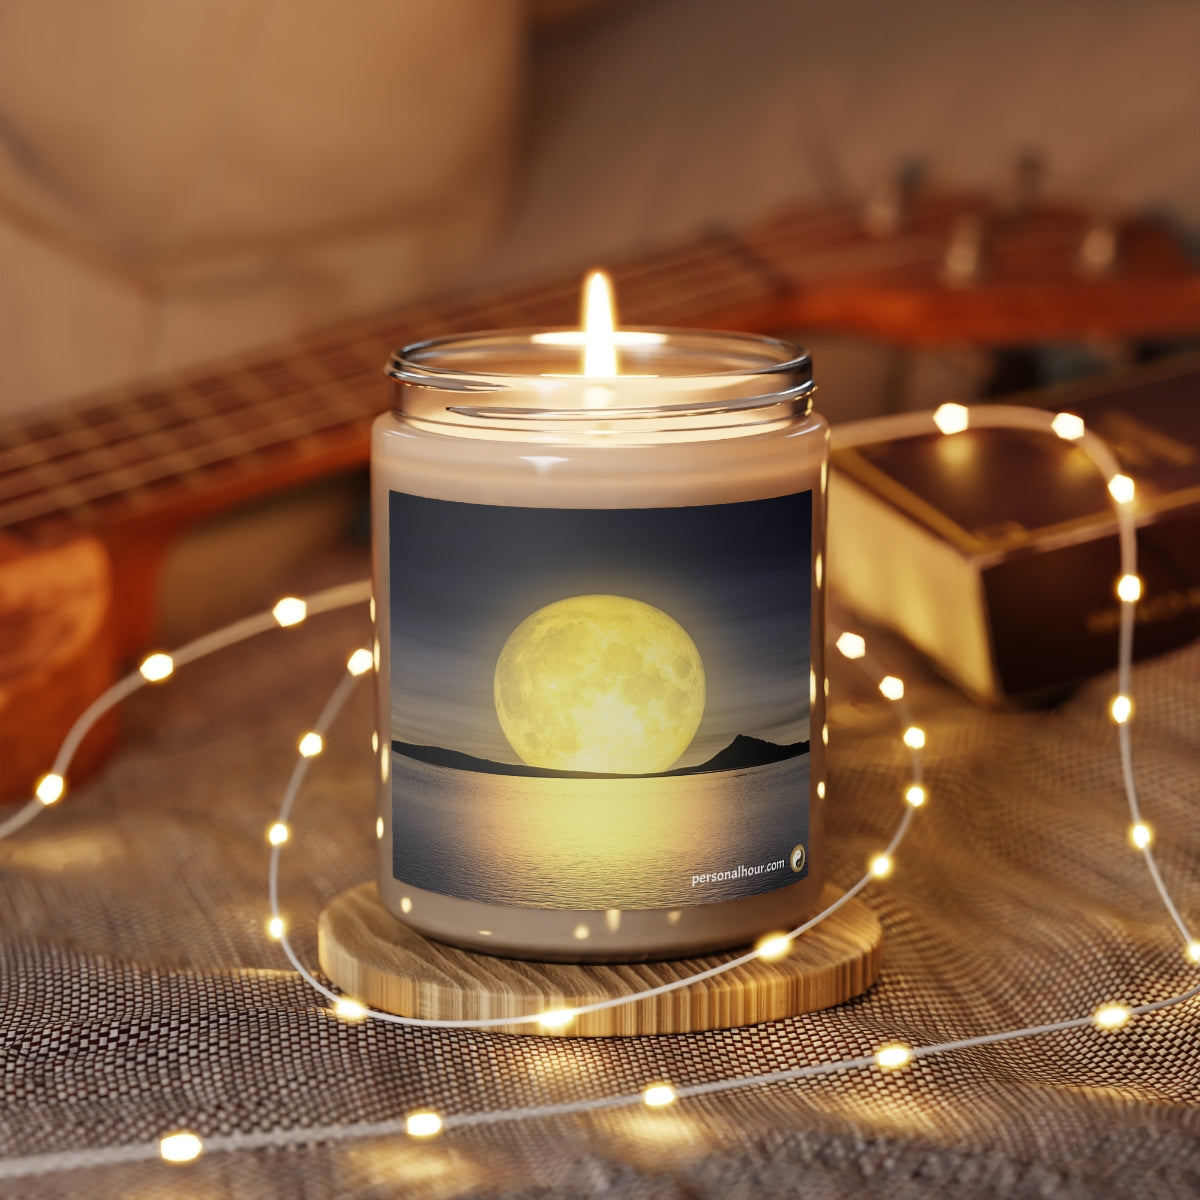 Full moon - Scented Candle, 9oz - Personal Hour for Yoga and Meditations 